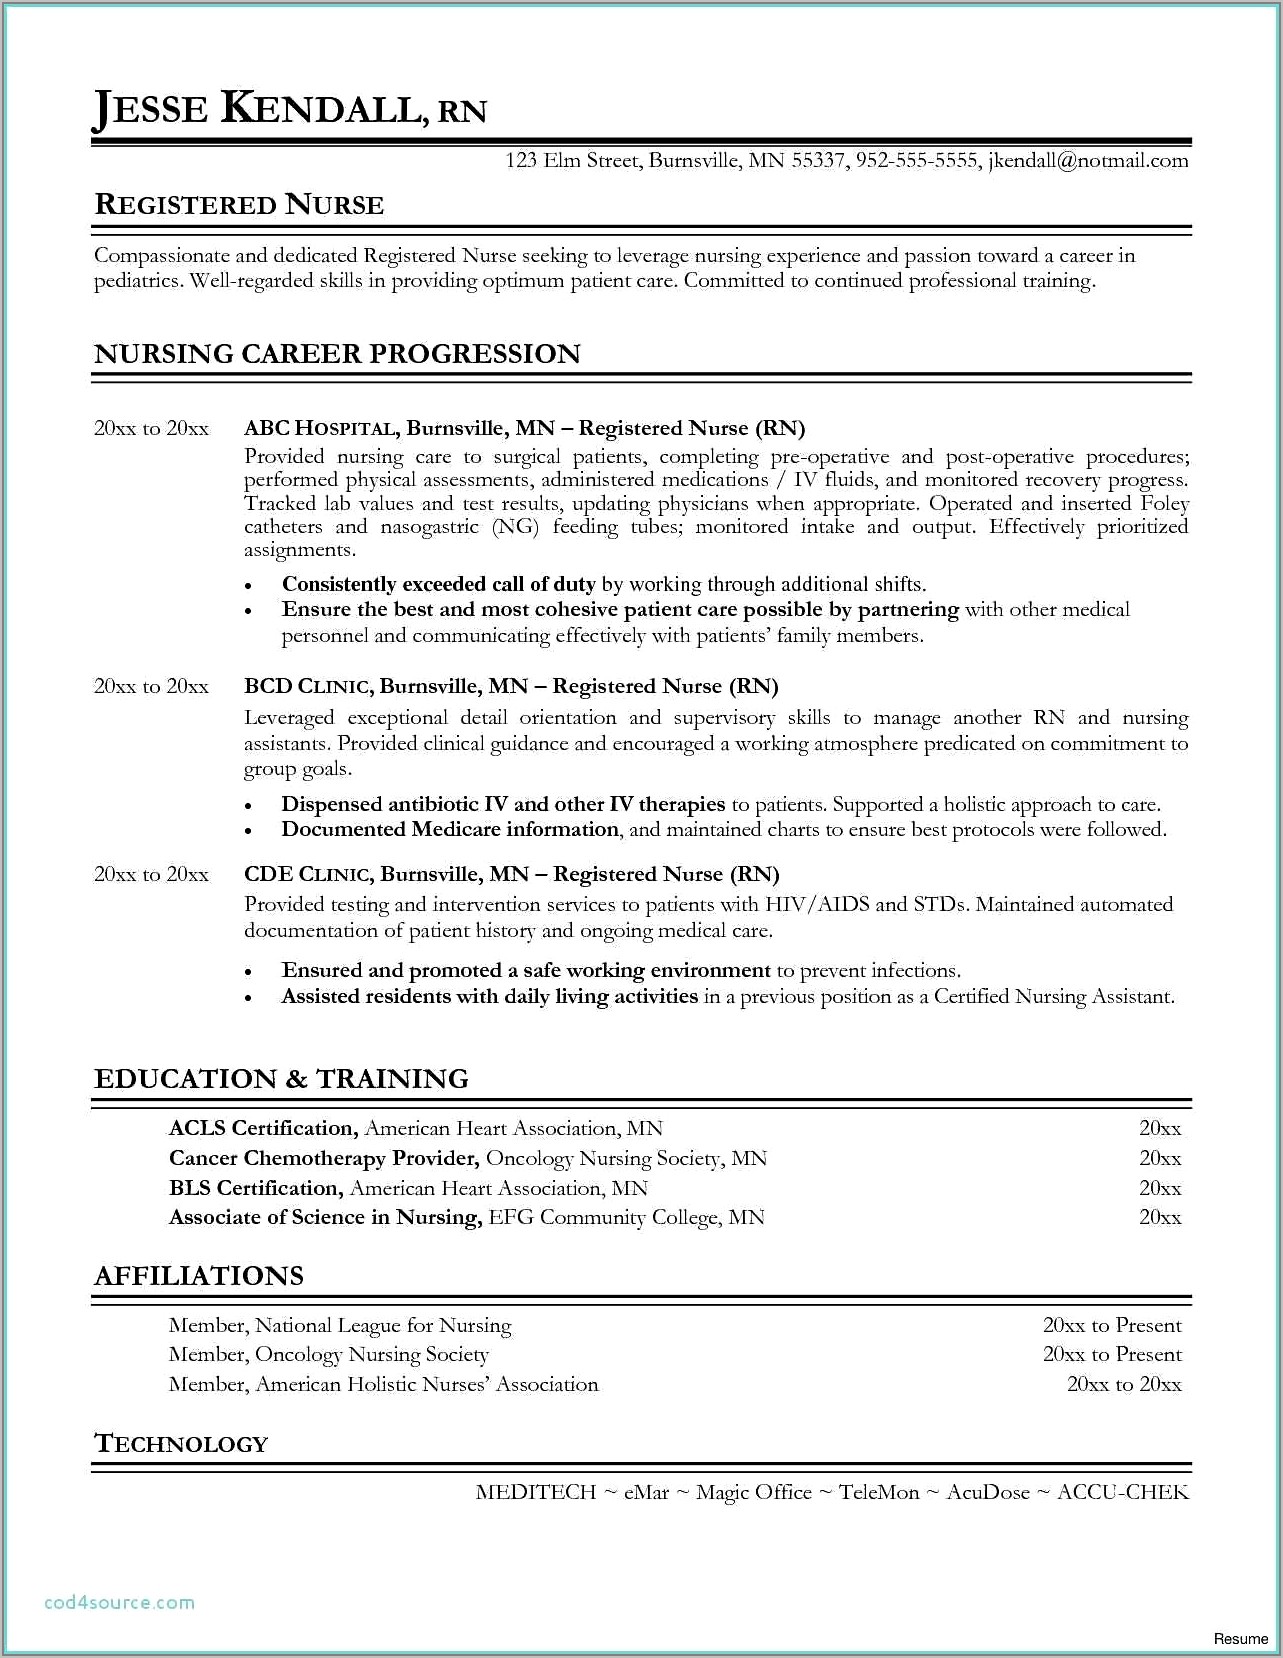 Resume Objective Examples Nursing Student